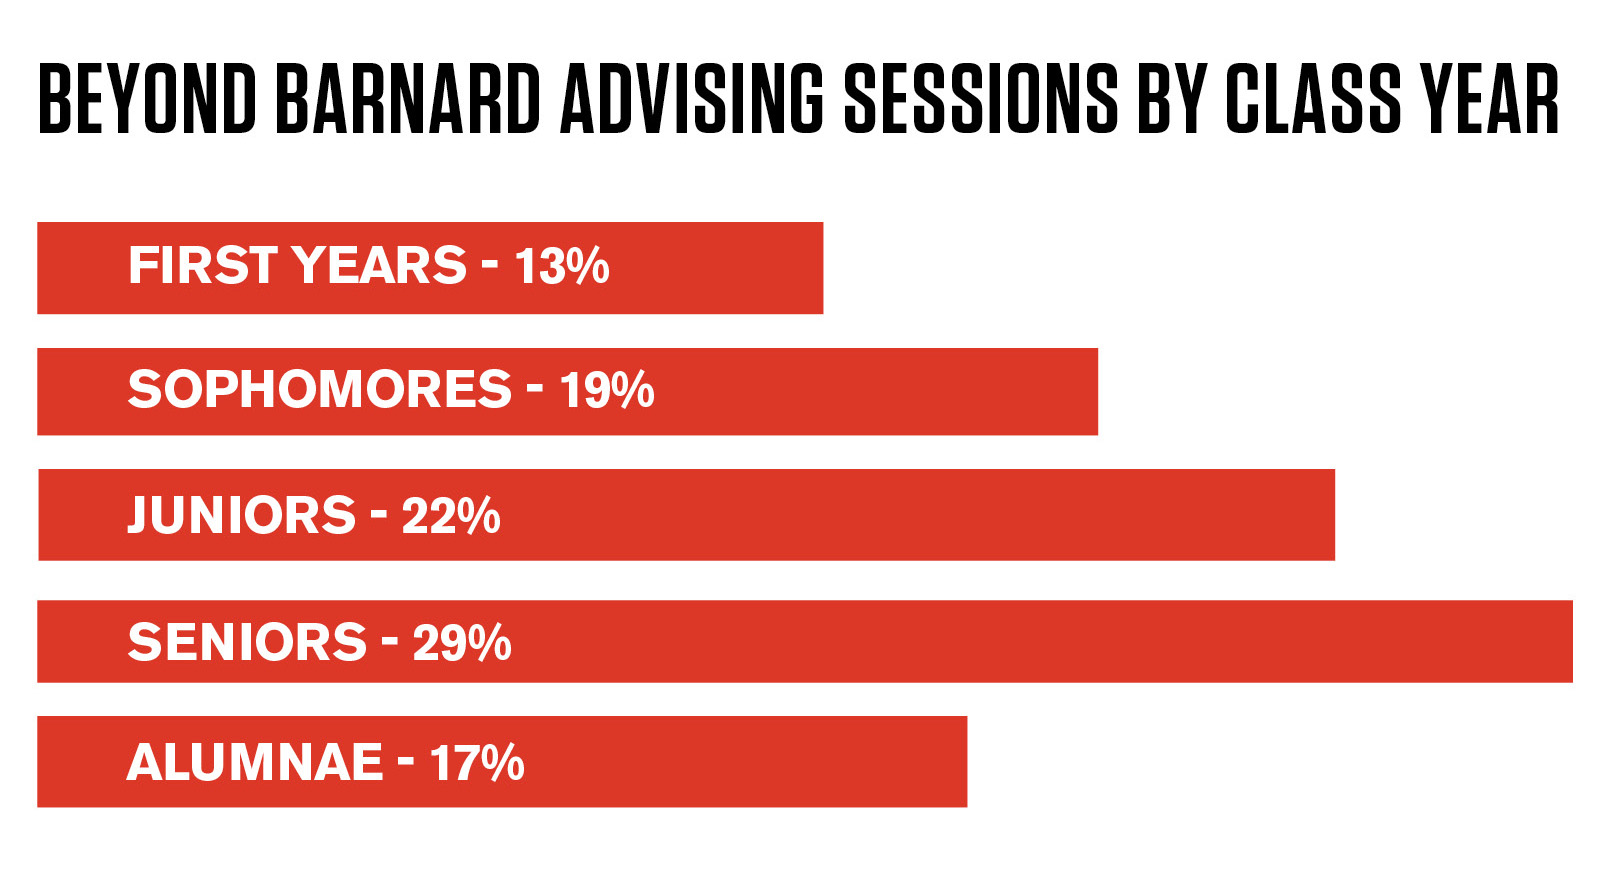 Bar chart showing number of advising sessions per class year